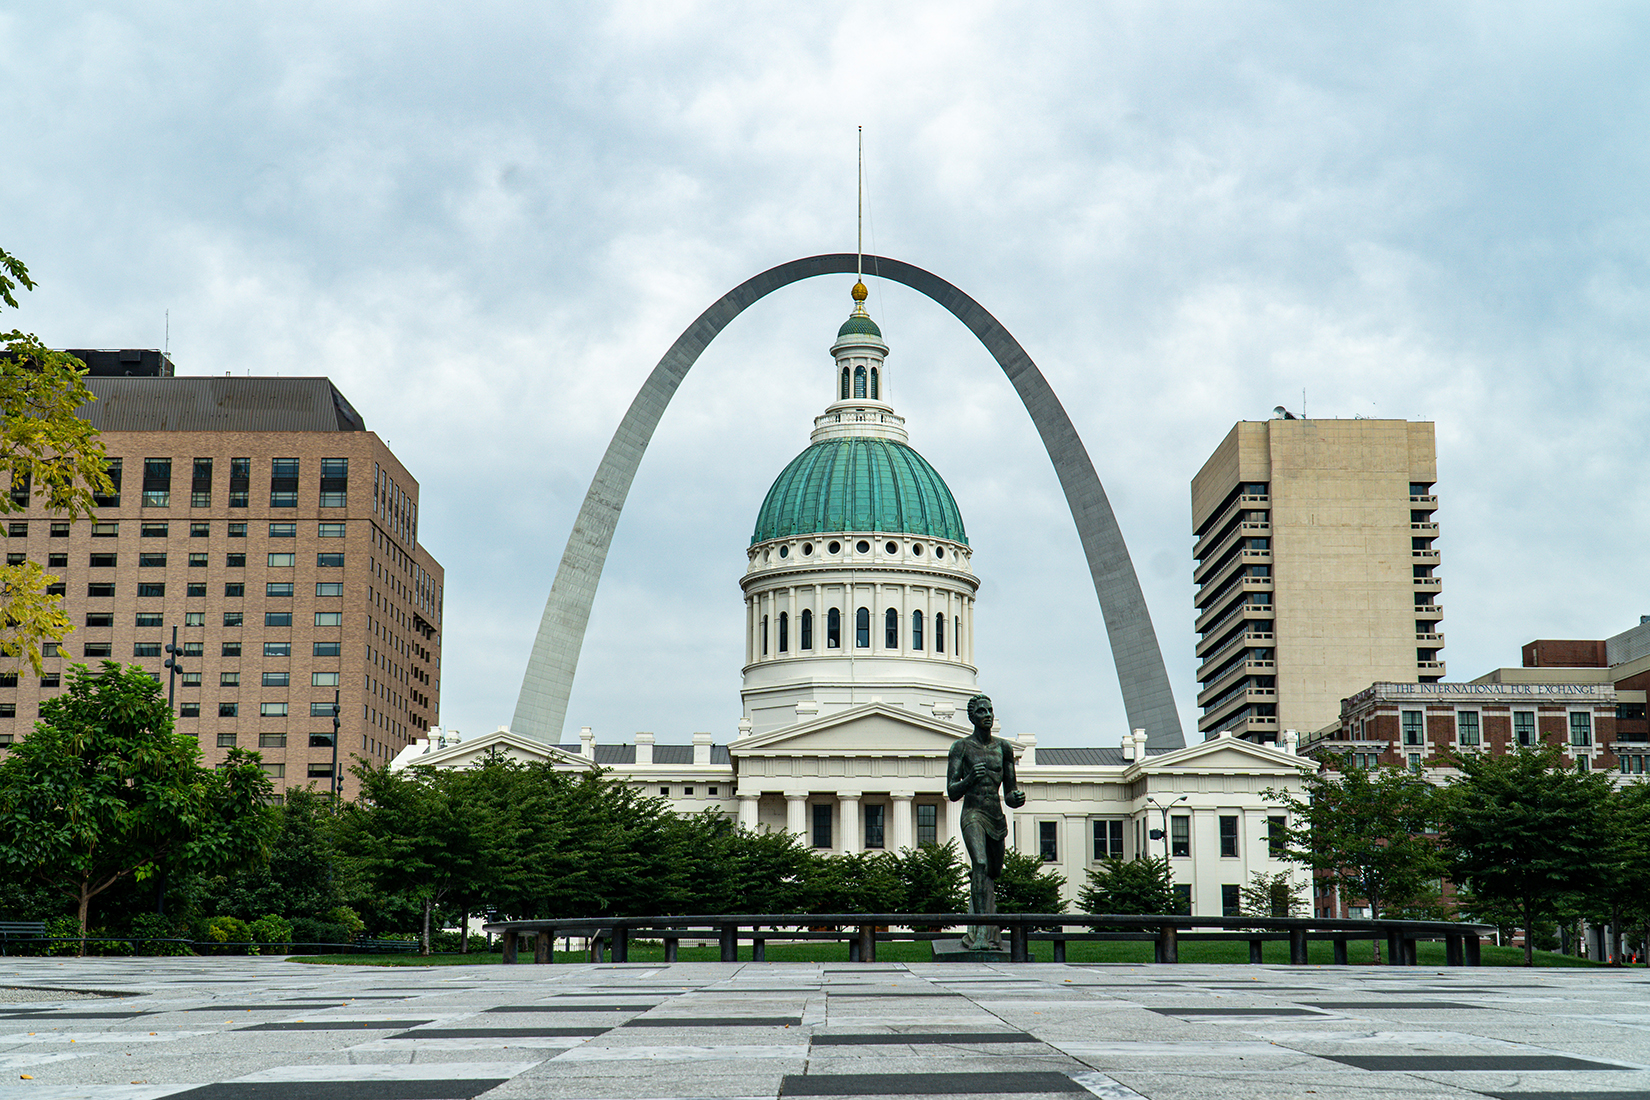 a capitol building stands in front of the St Louis arch.